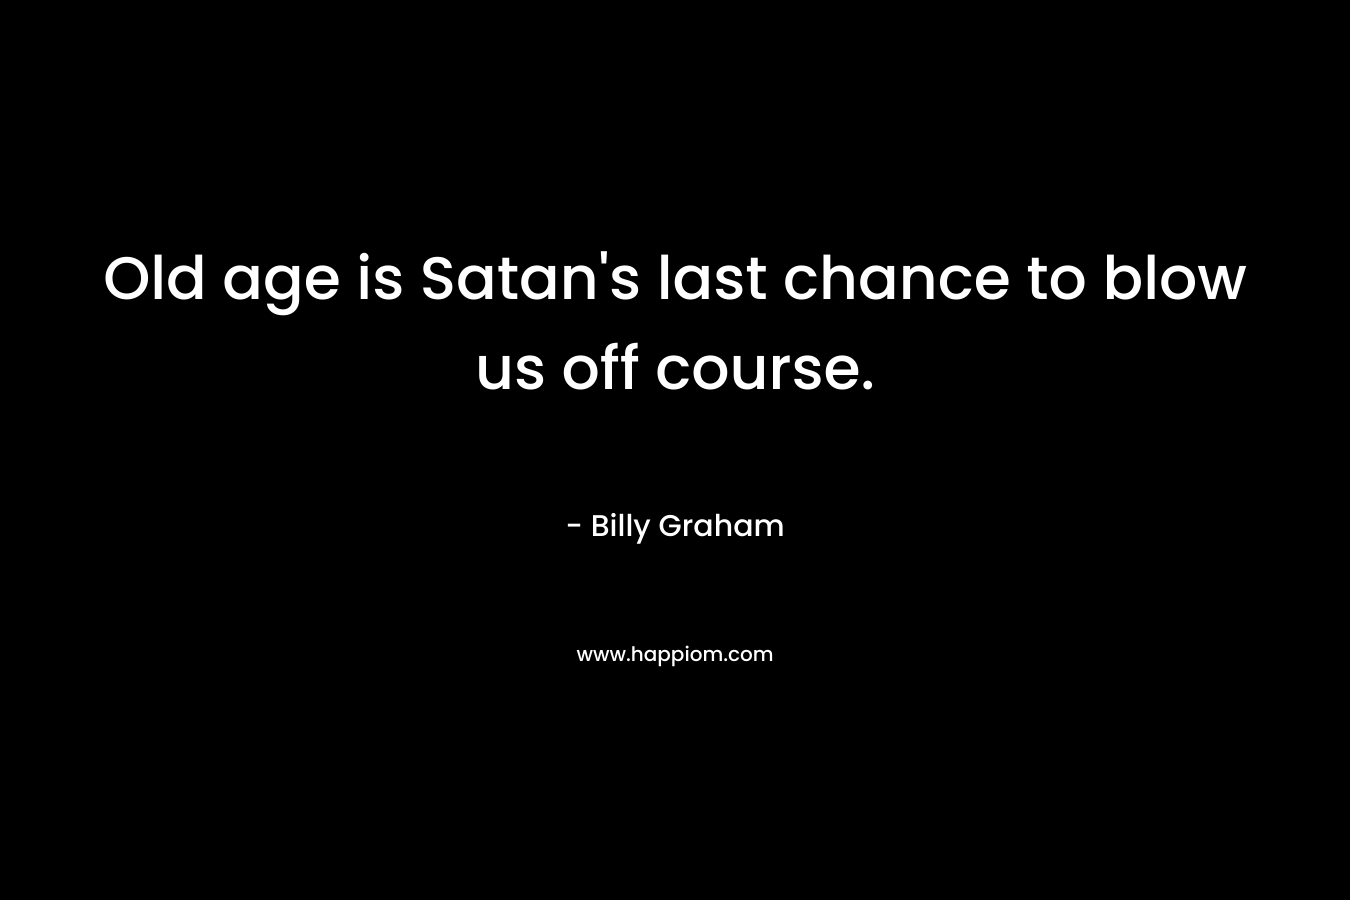 Old age is Satan’s last chance to blow us off course. – Billy Graham